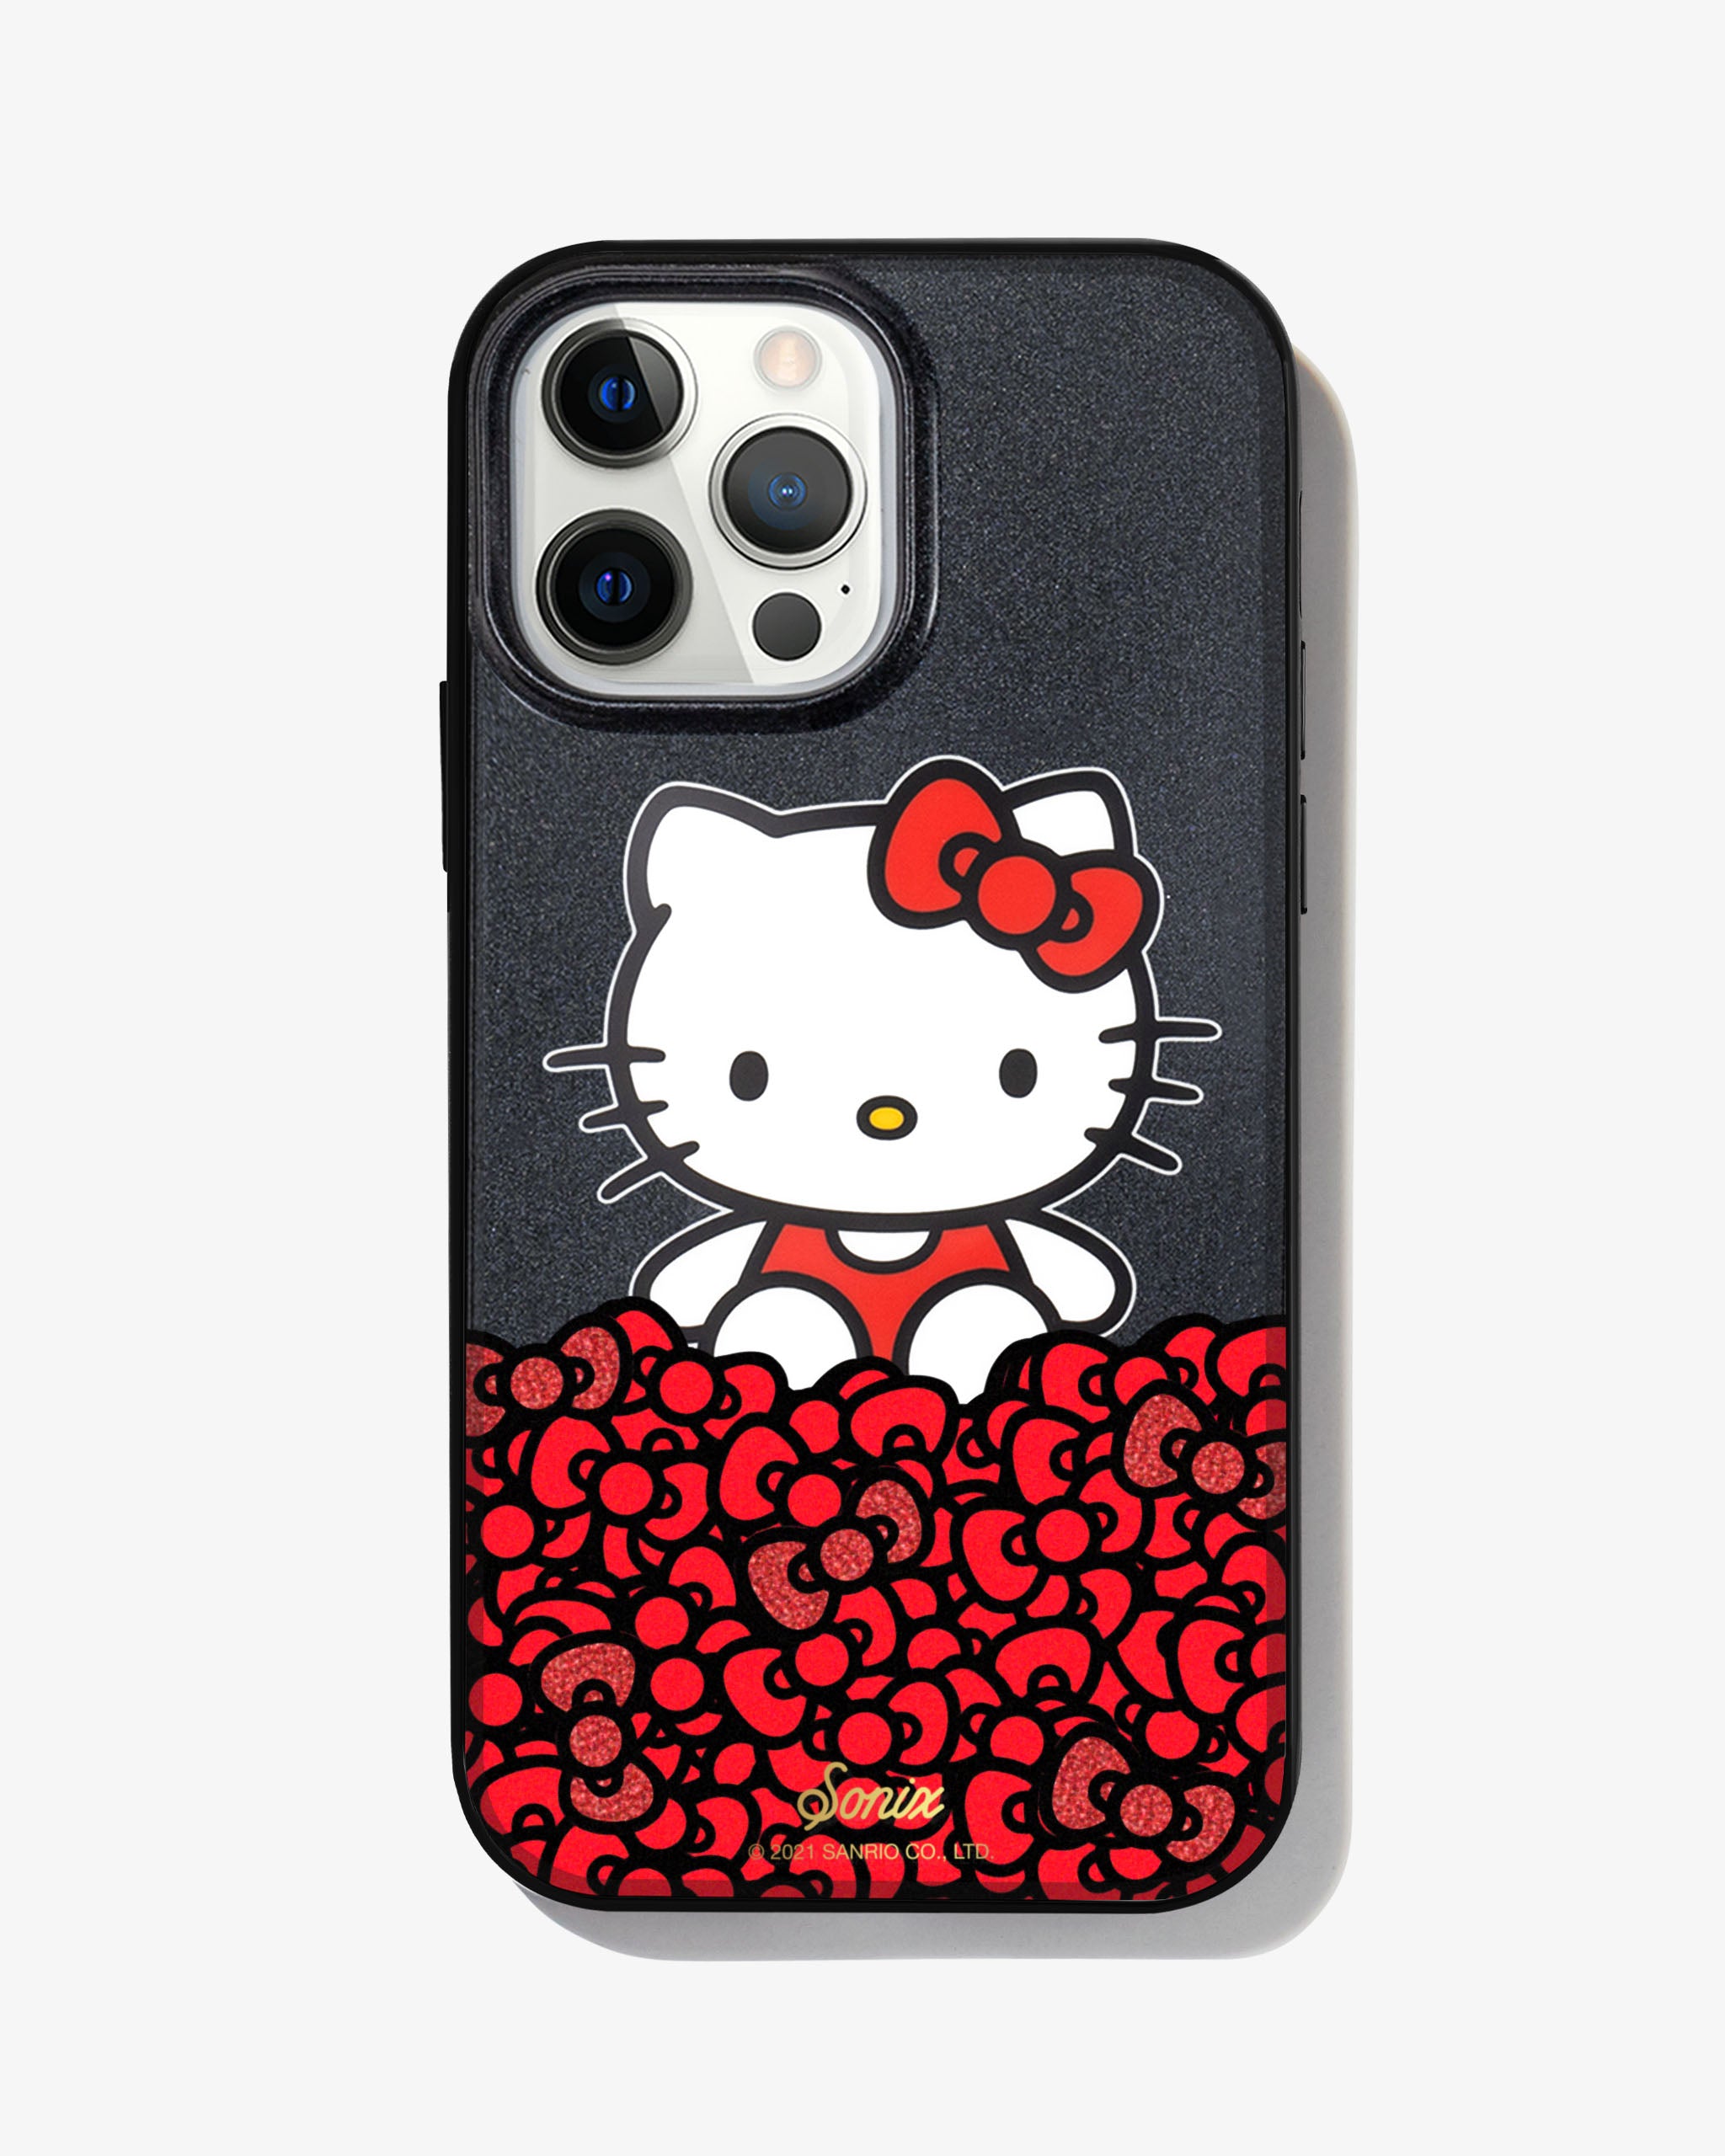 black glitter and Hello Kitty sitting on a bundle of her iconic red bows shown on a iphone 12 pro